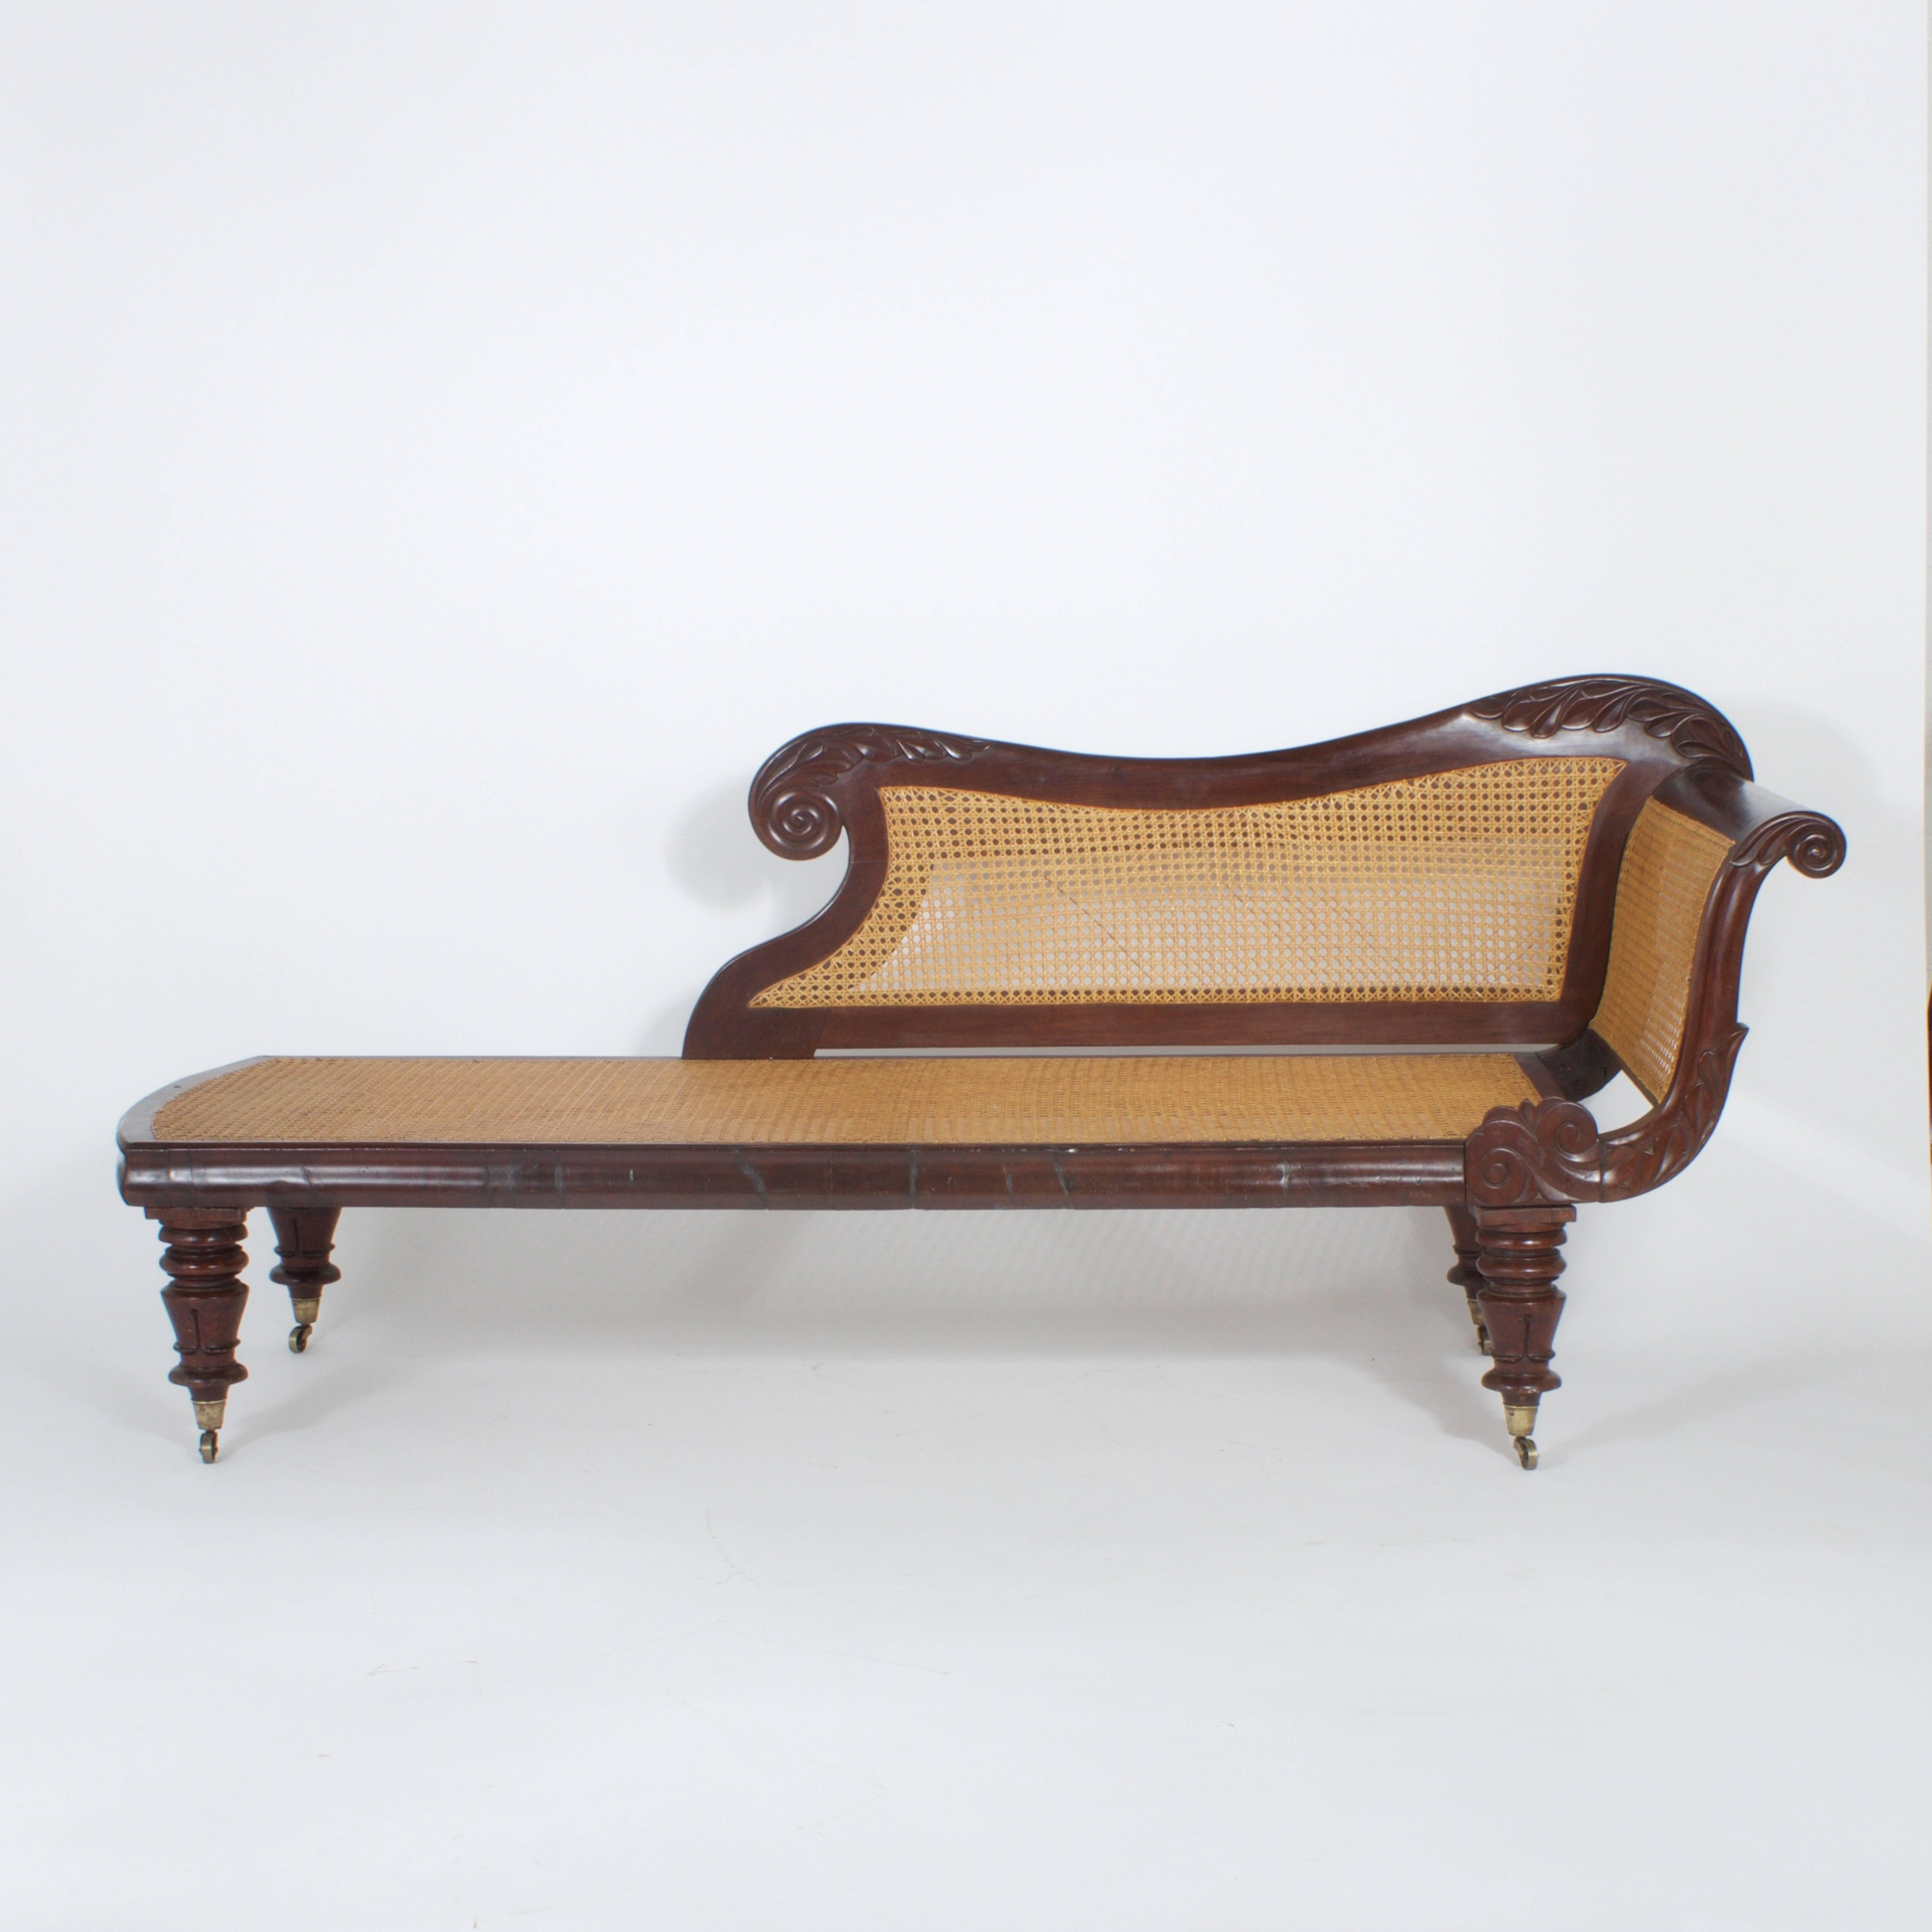 Antique West Indies, sometimes confused with Anglo Indian, mahogany caned chase longue or lounge with dramatic flowing form. Made from dark and rich beautifully grained hardwood with carvings of acanthus leaves and nautilus inspired scrolls. The